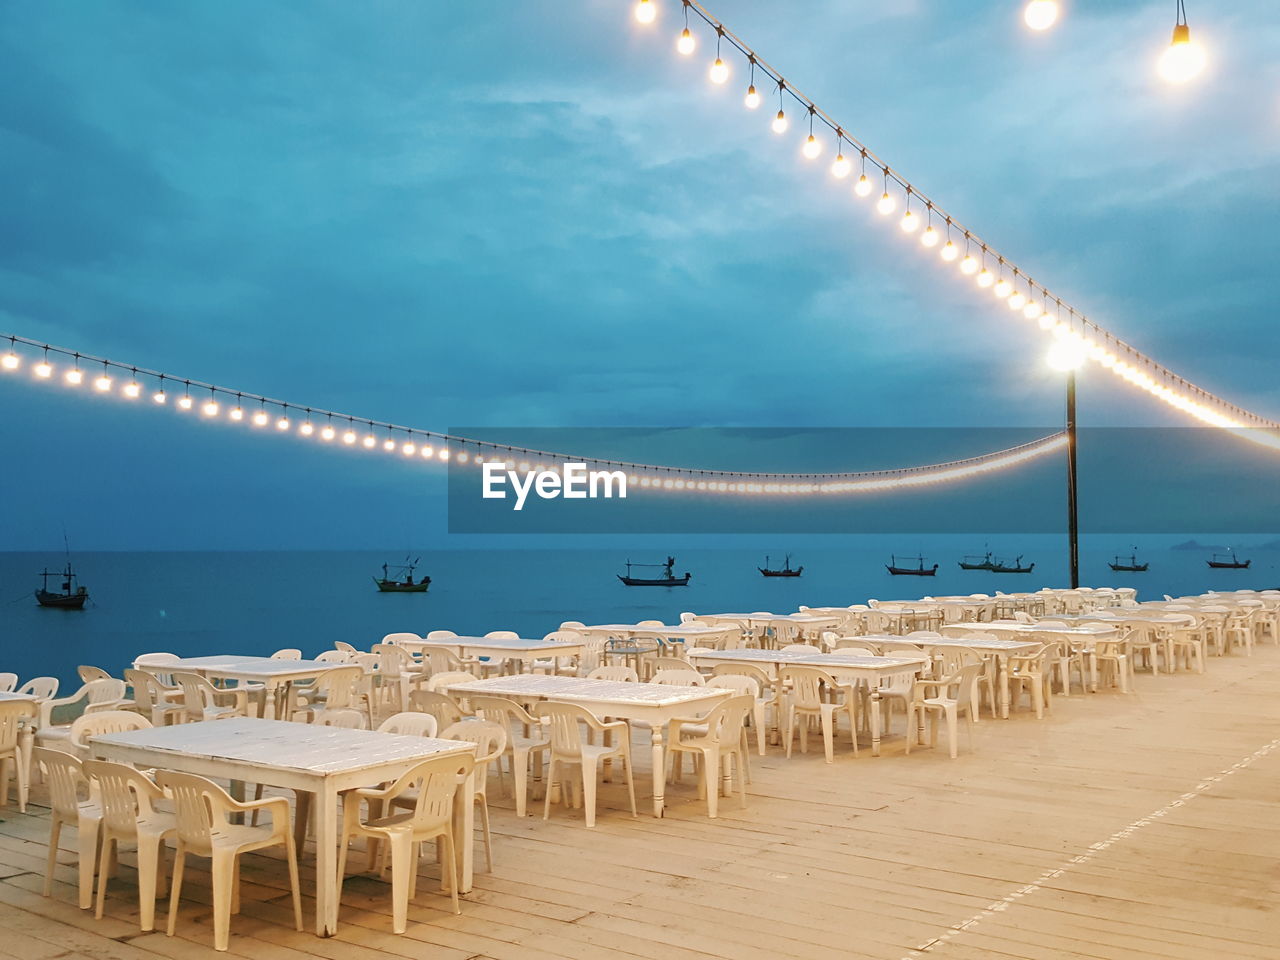 The romantic evening dining place decorated with the warm lamps and sea view